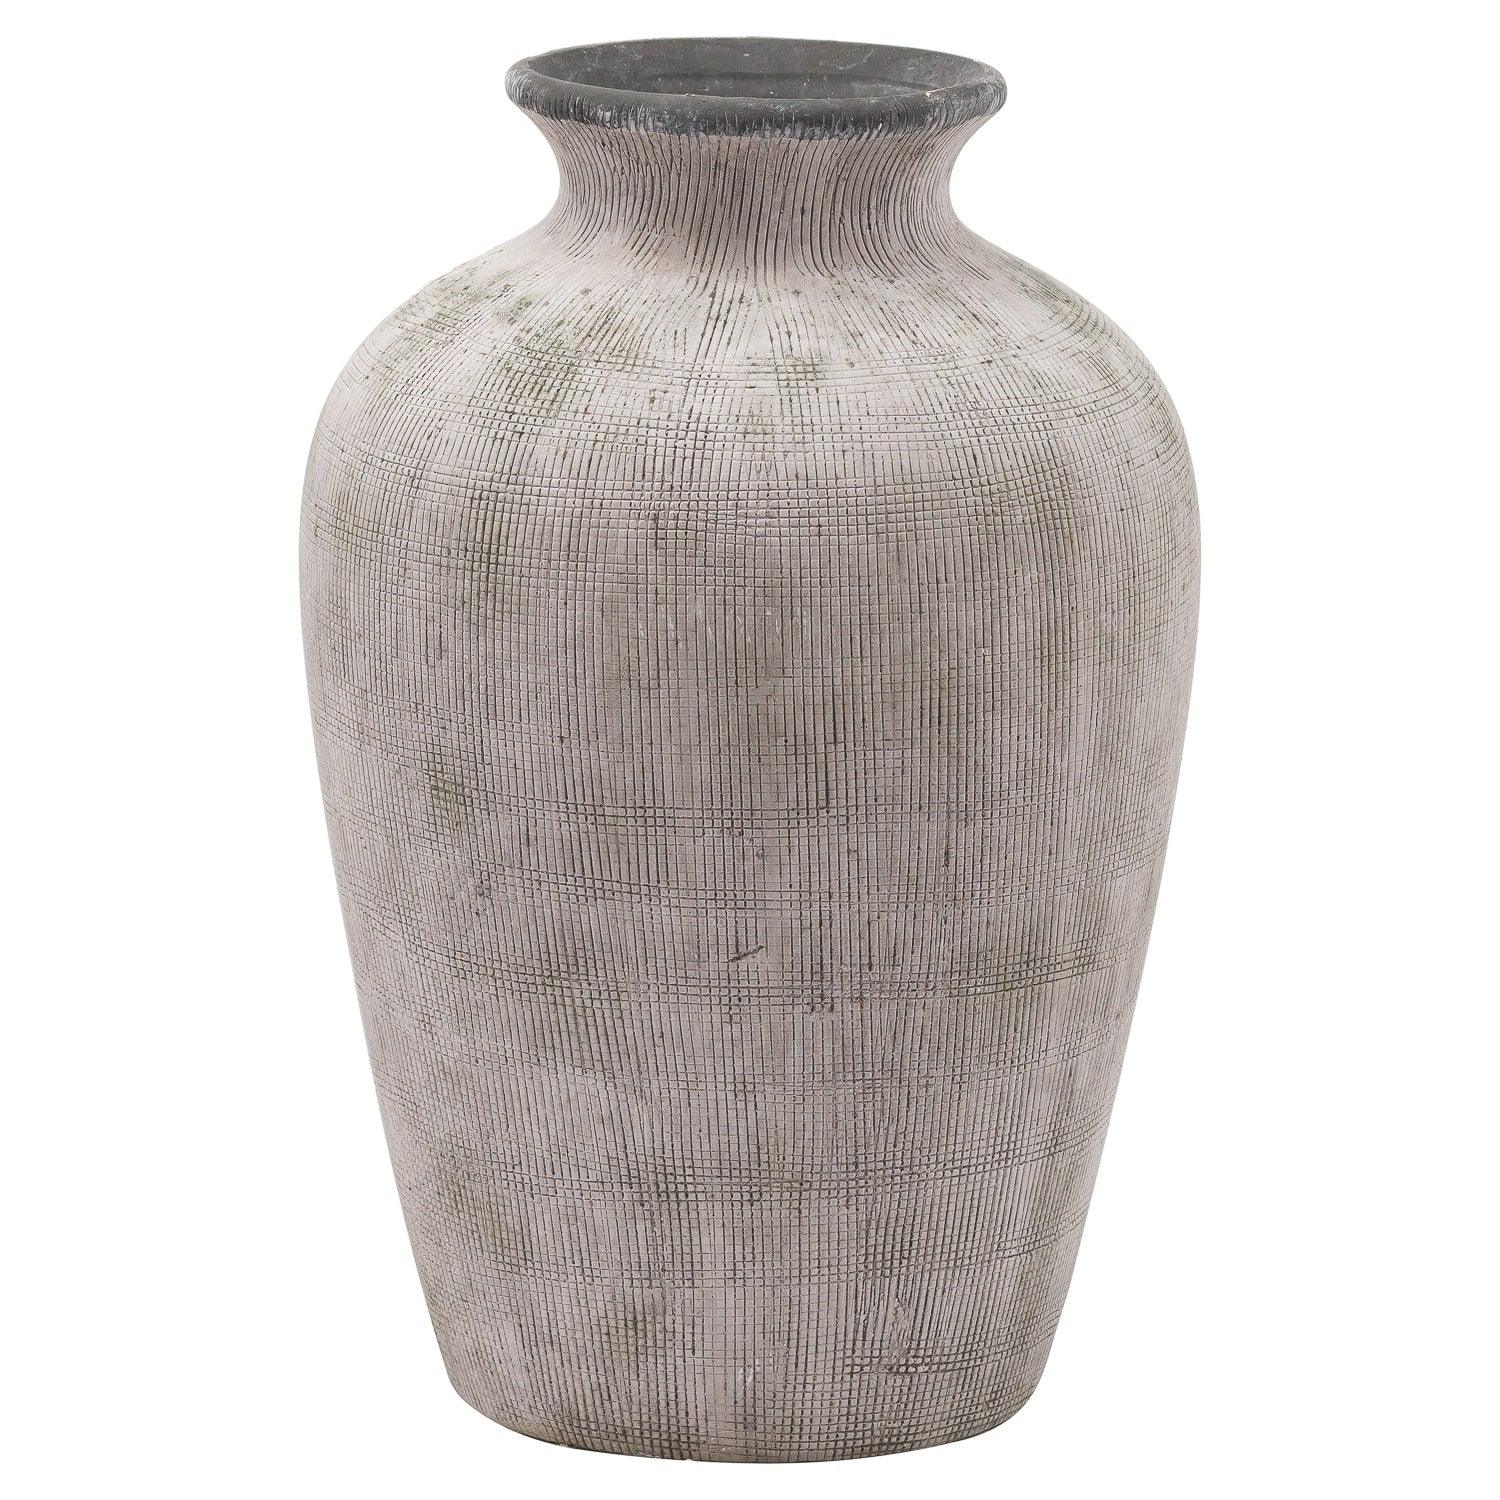 Bloomville Chours Stone Vase - Charming Spaces